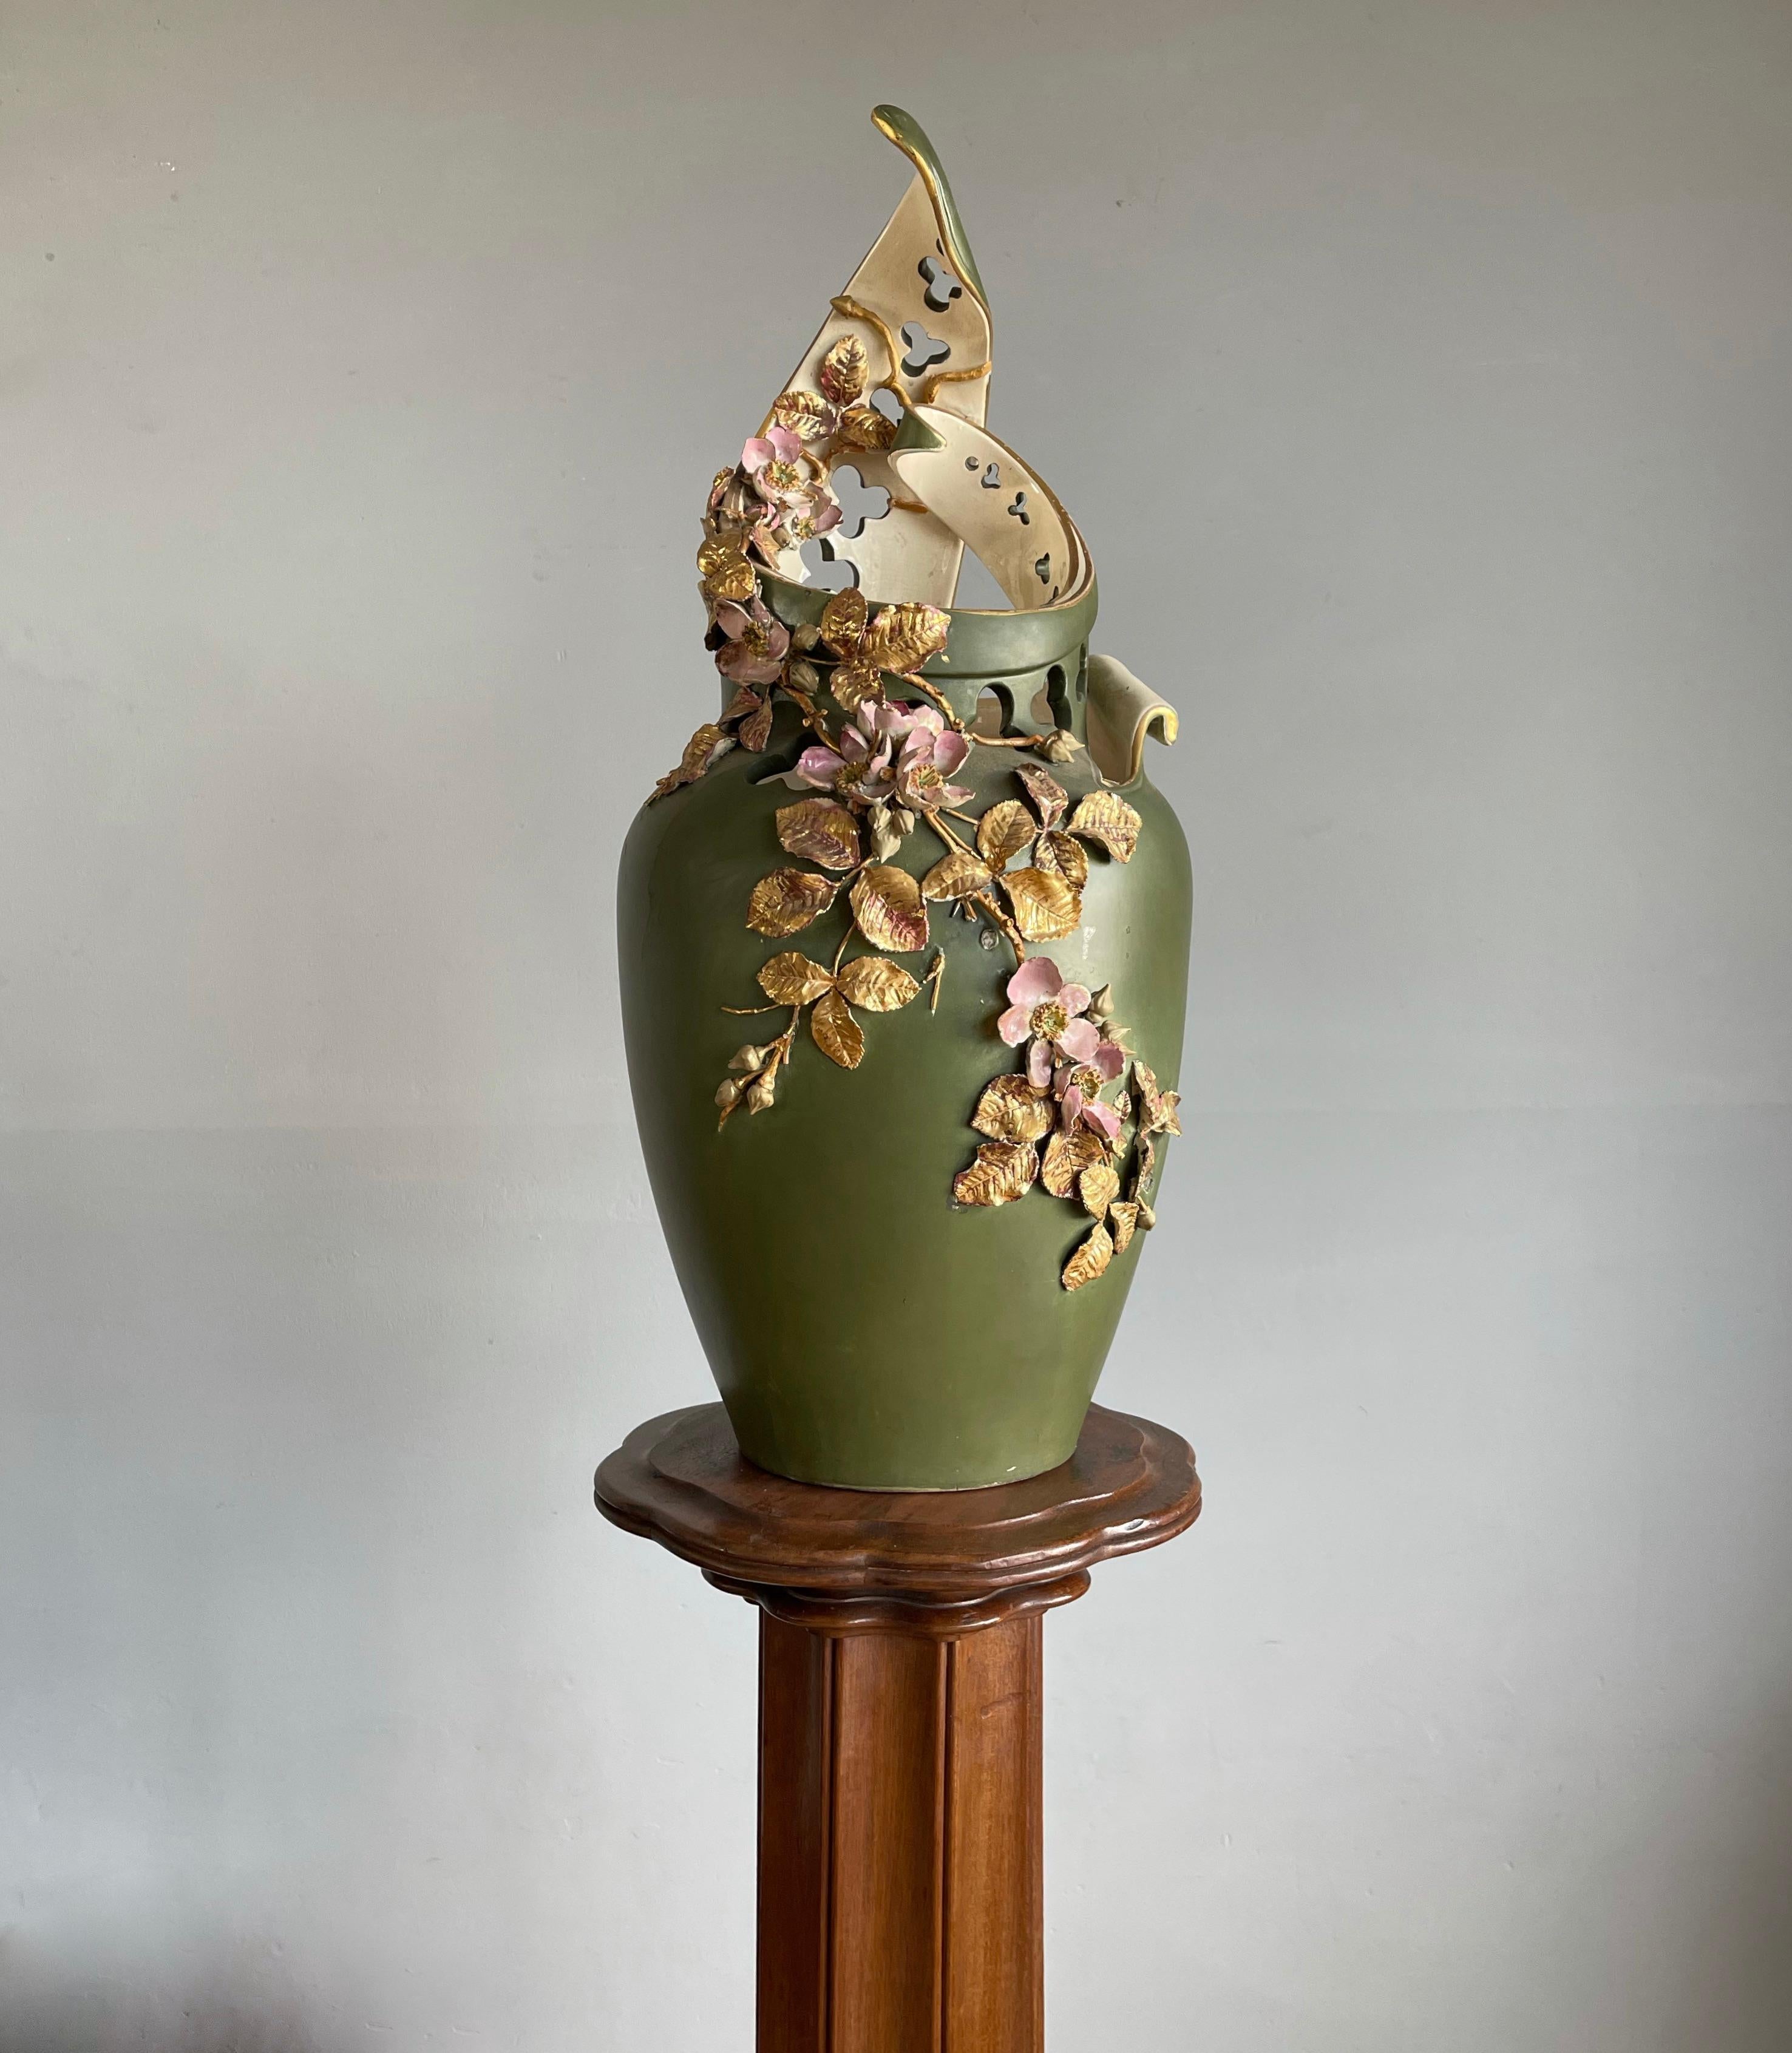 European Early 1900s Impressive and Finely Handcrafted Antique Gothic Art Porcelain Vase For Sale